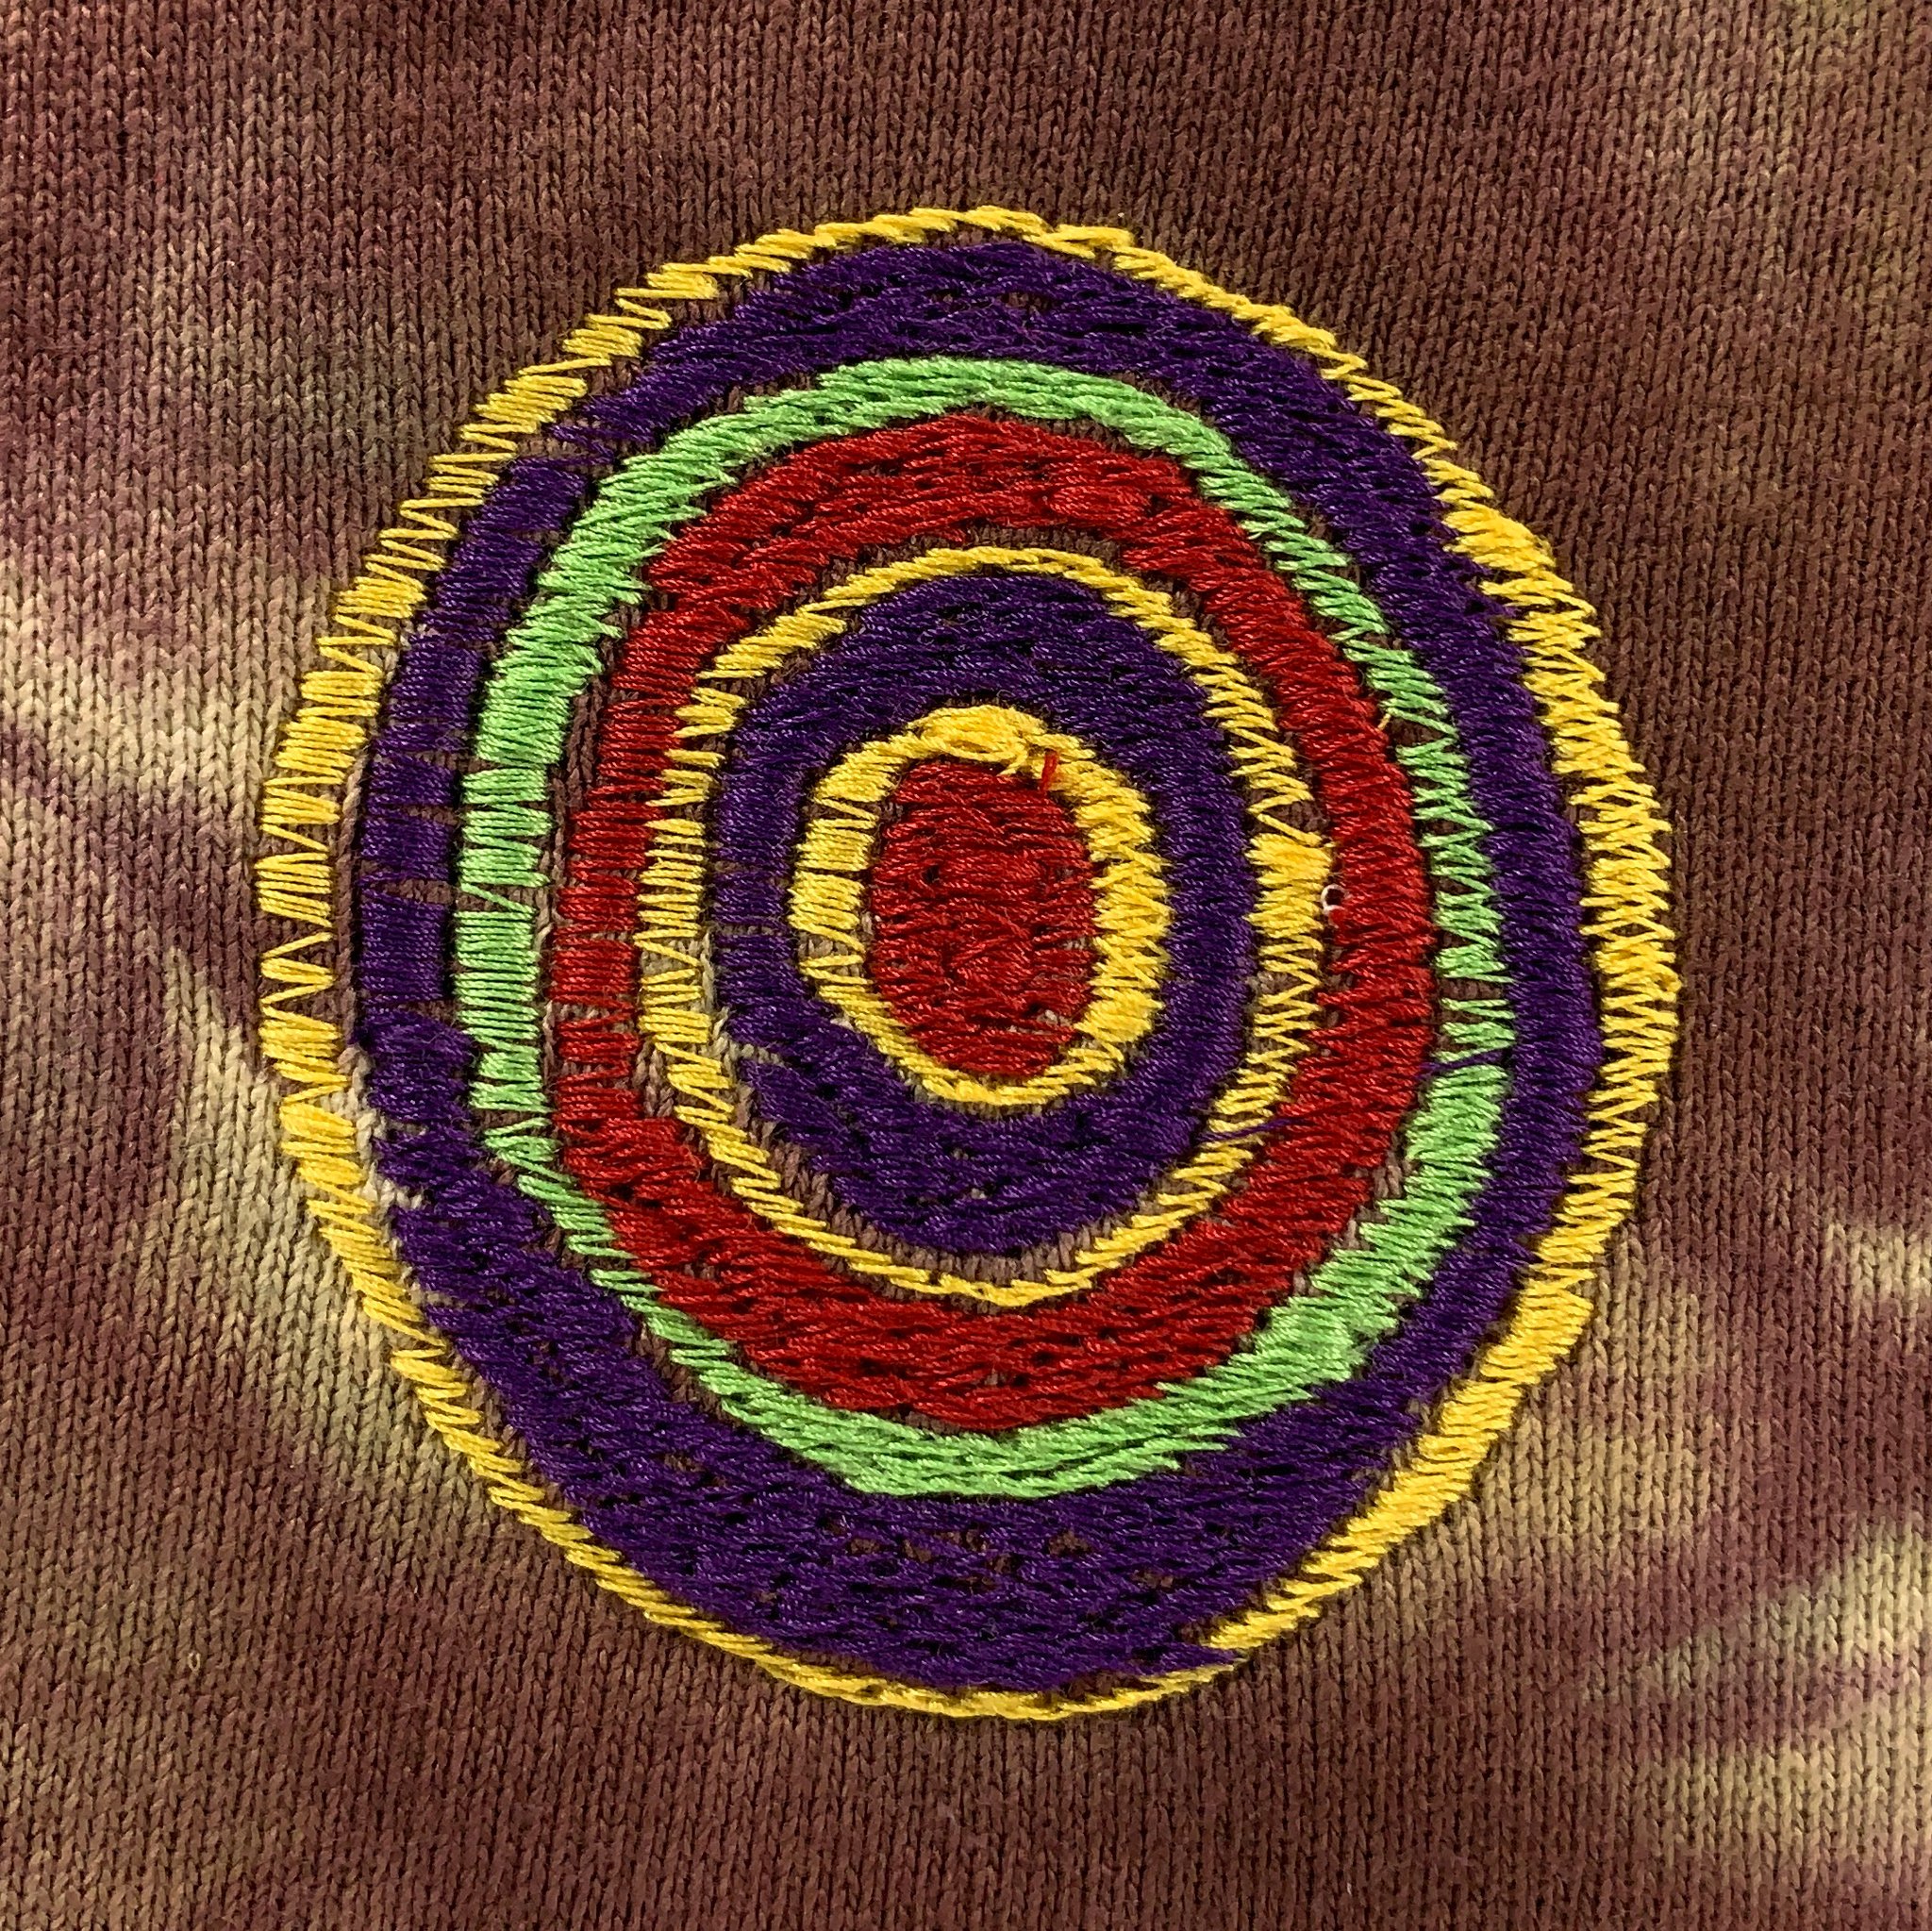 Embroidered and Dyed Hoodie - Large